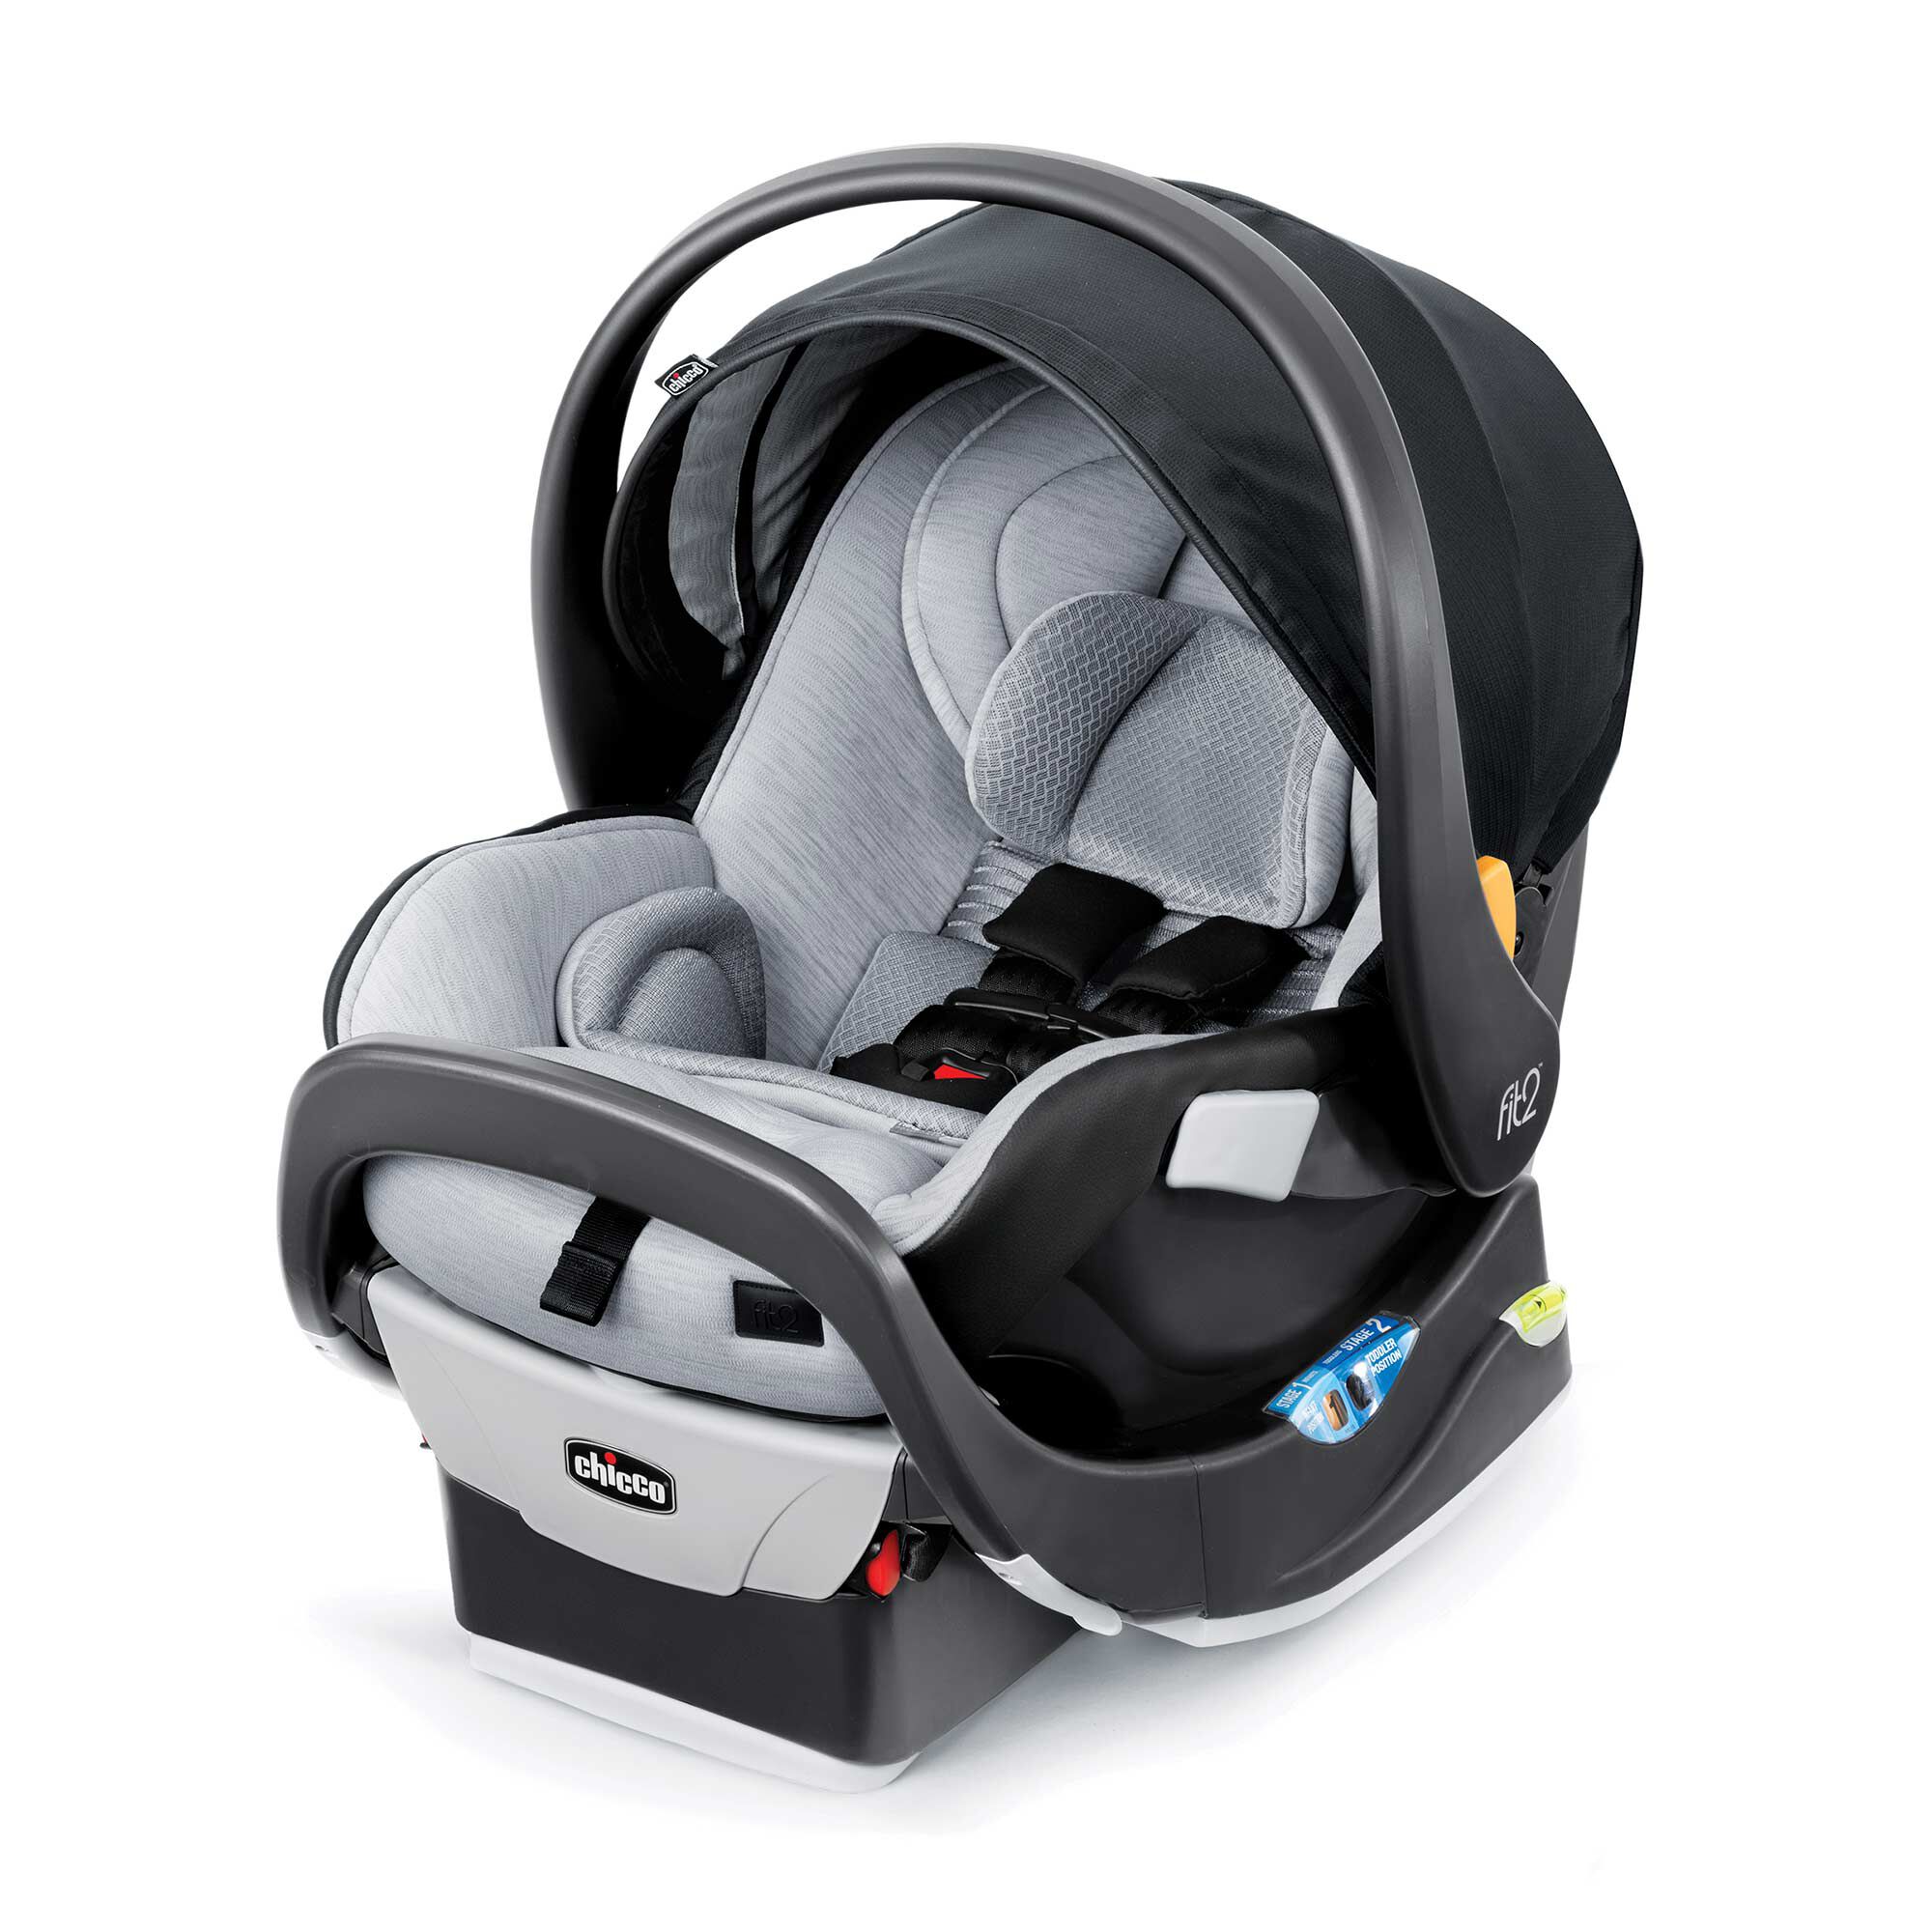 Diplomatie Frank Knorretje Fit2 Air Infant & Toddler Car Seat - Vero | ChiccoUSA